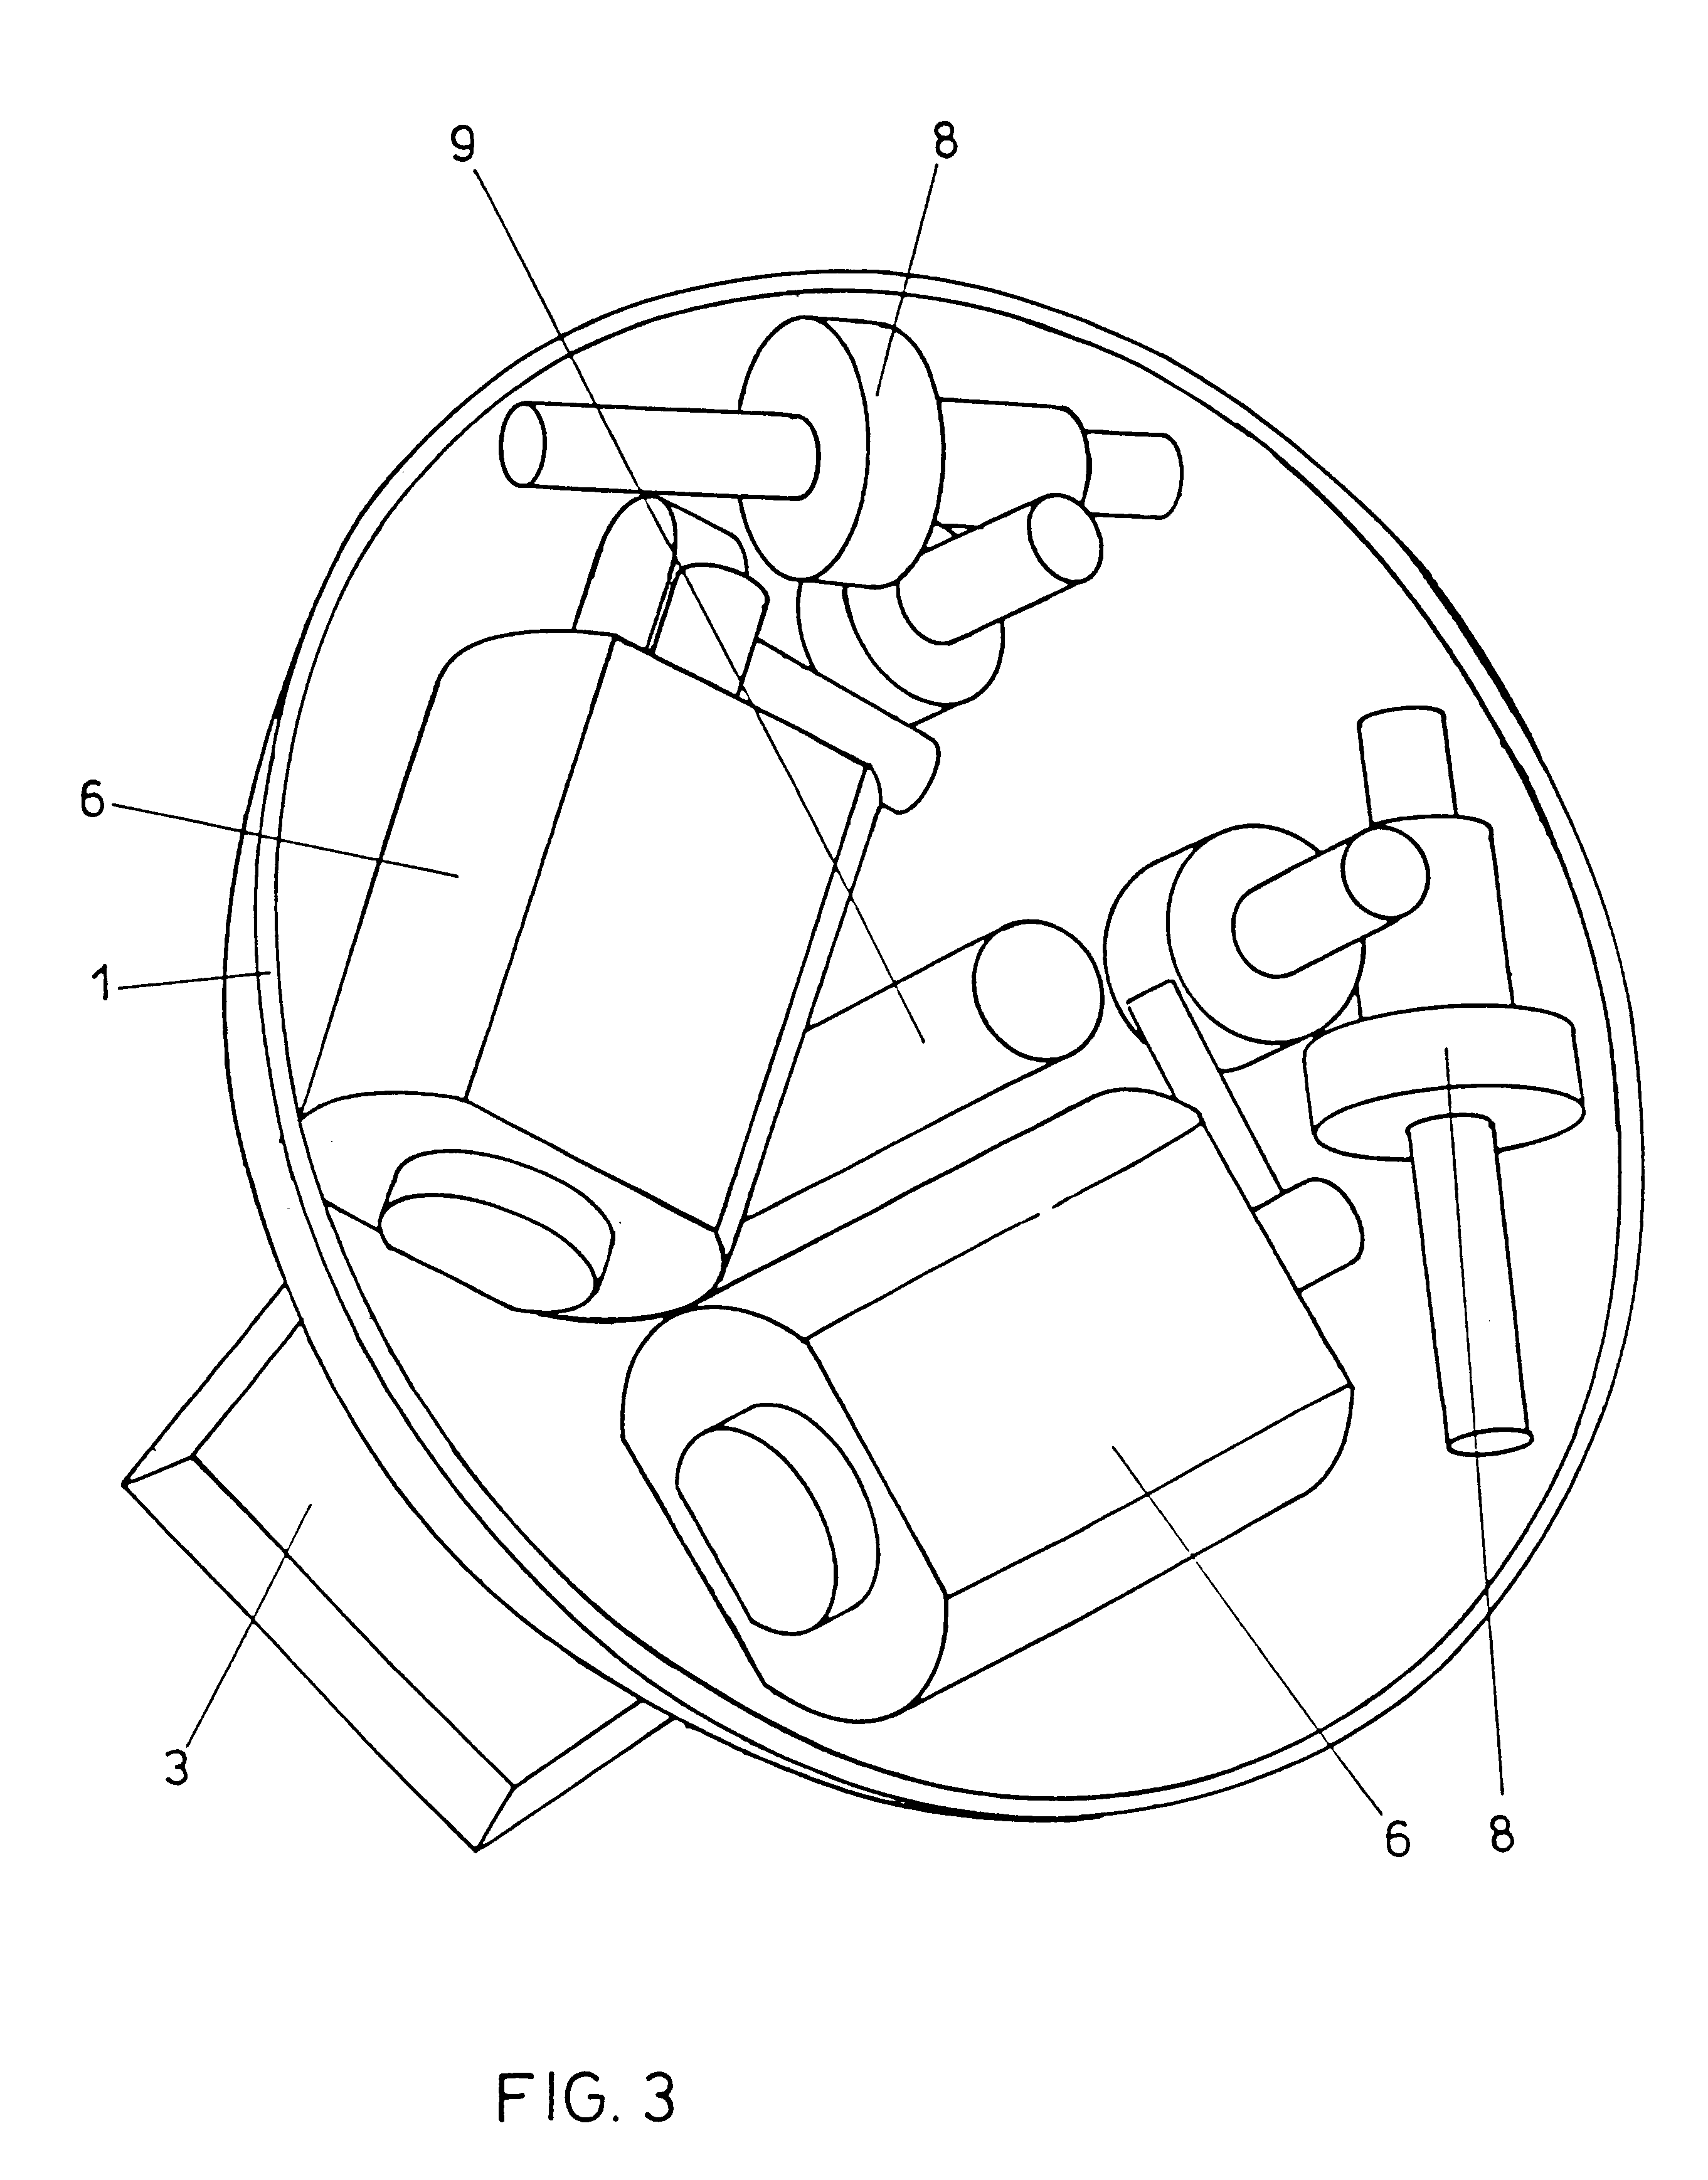 Adjustable rear-view mirror for a vehicle